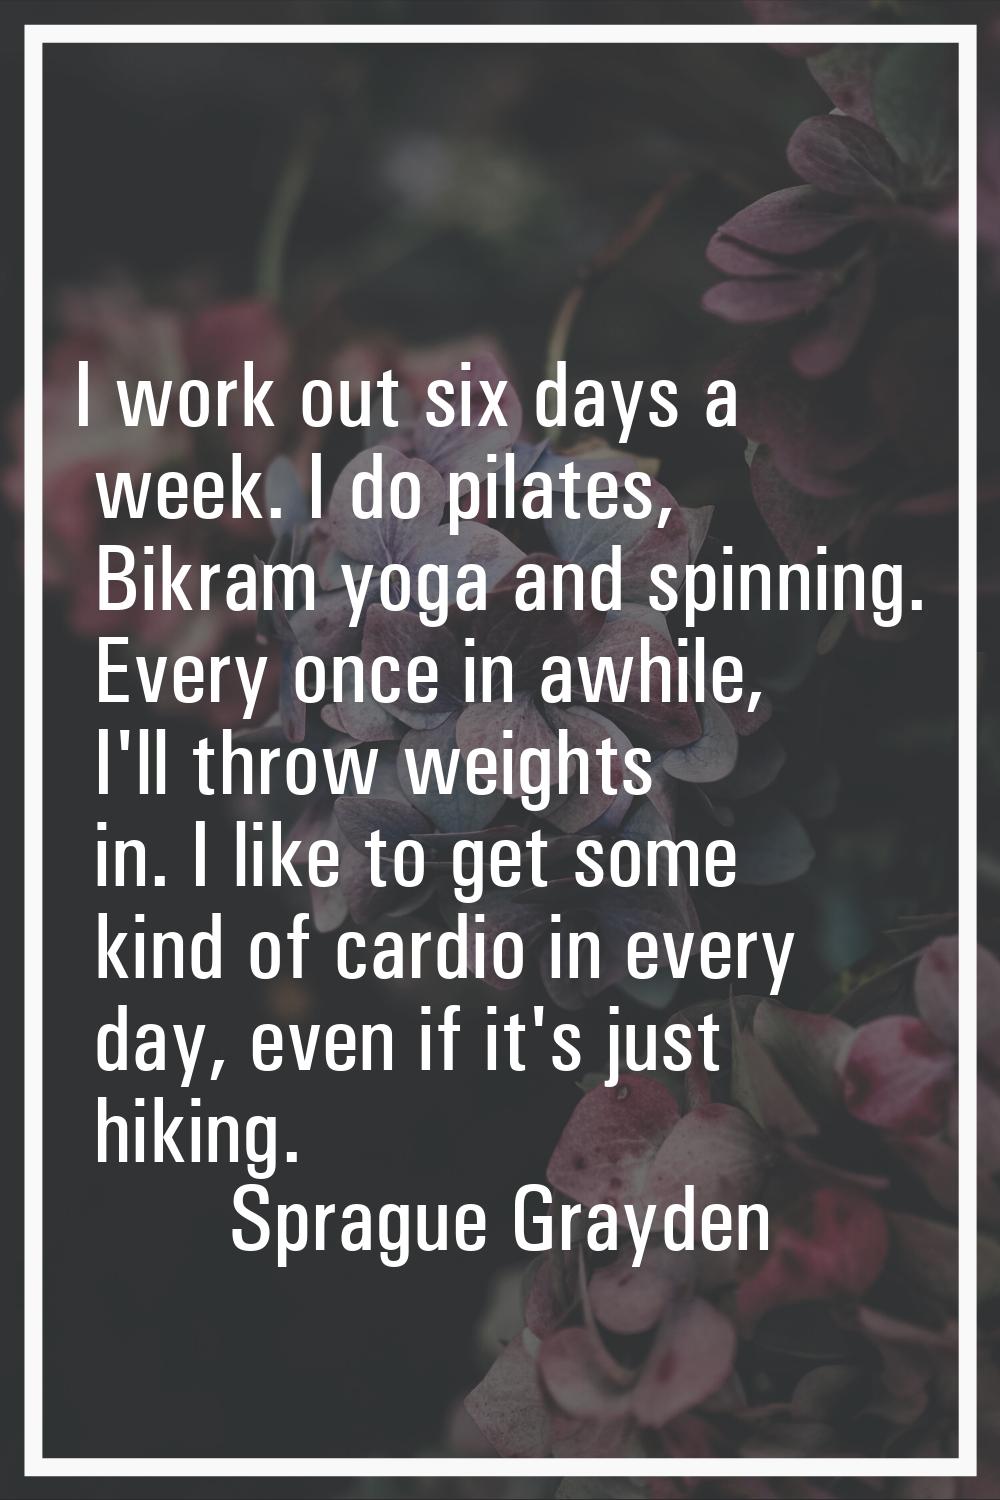 I work out six days a week. I do pilates, Bikram yoga and spinning. Every once in awhile, I'll thro